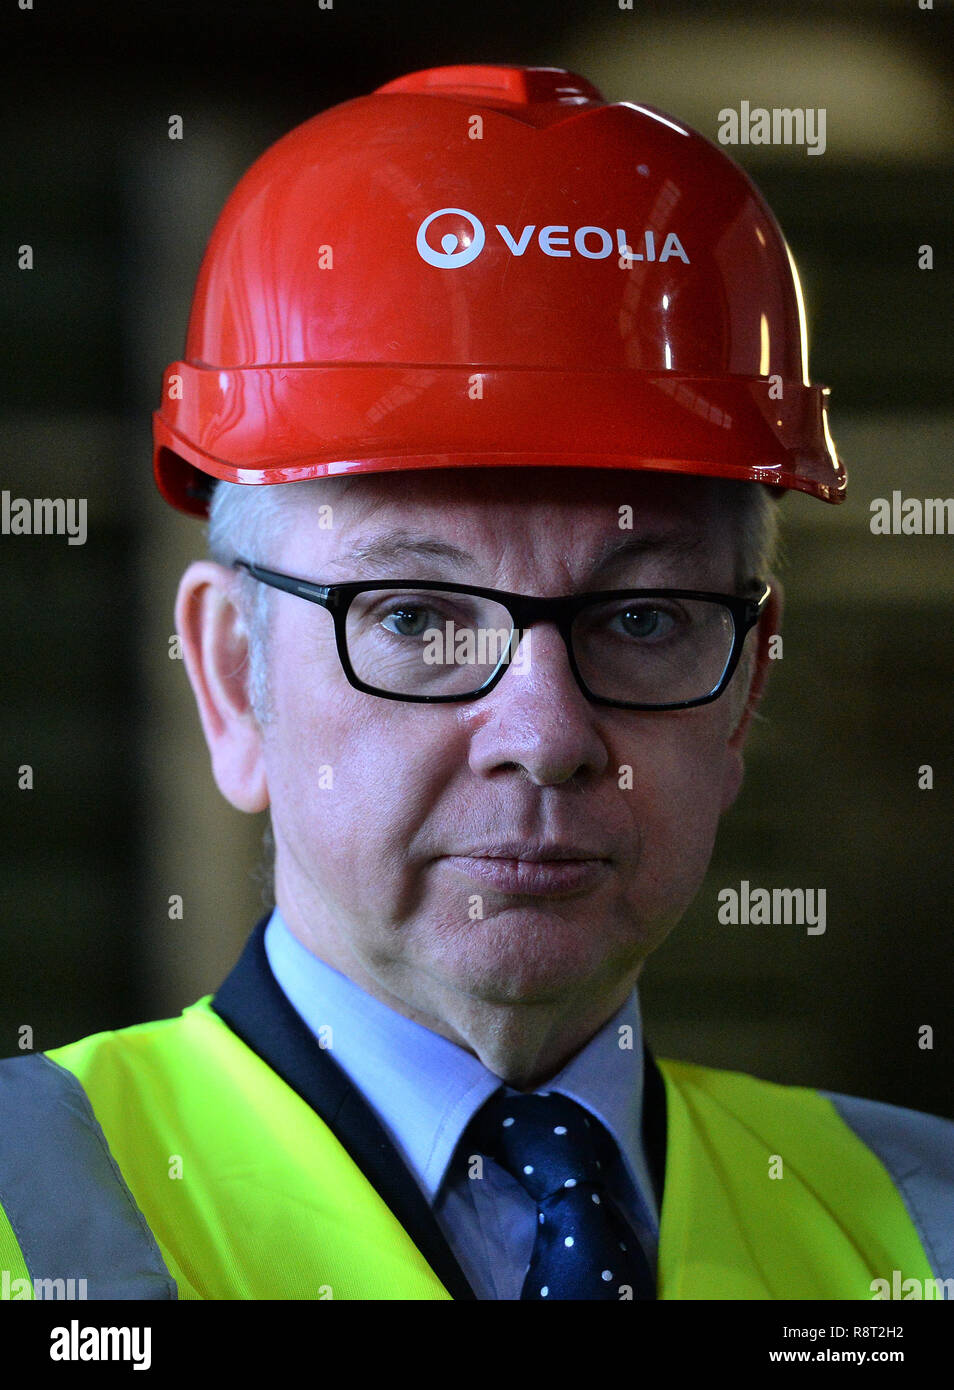 Environment Secretary Michael Gove visits the Veolia Integrated Waste Management Facility in Southwark, south London, ahead of next week's launch of the government's Resources and Waste Strategy. Stock Photo